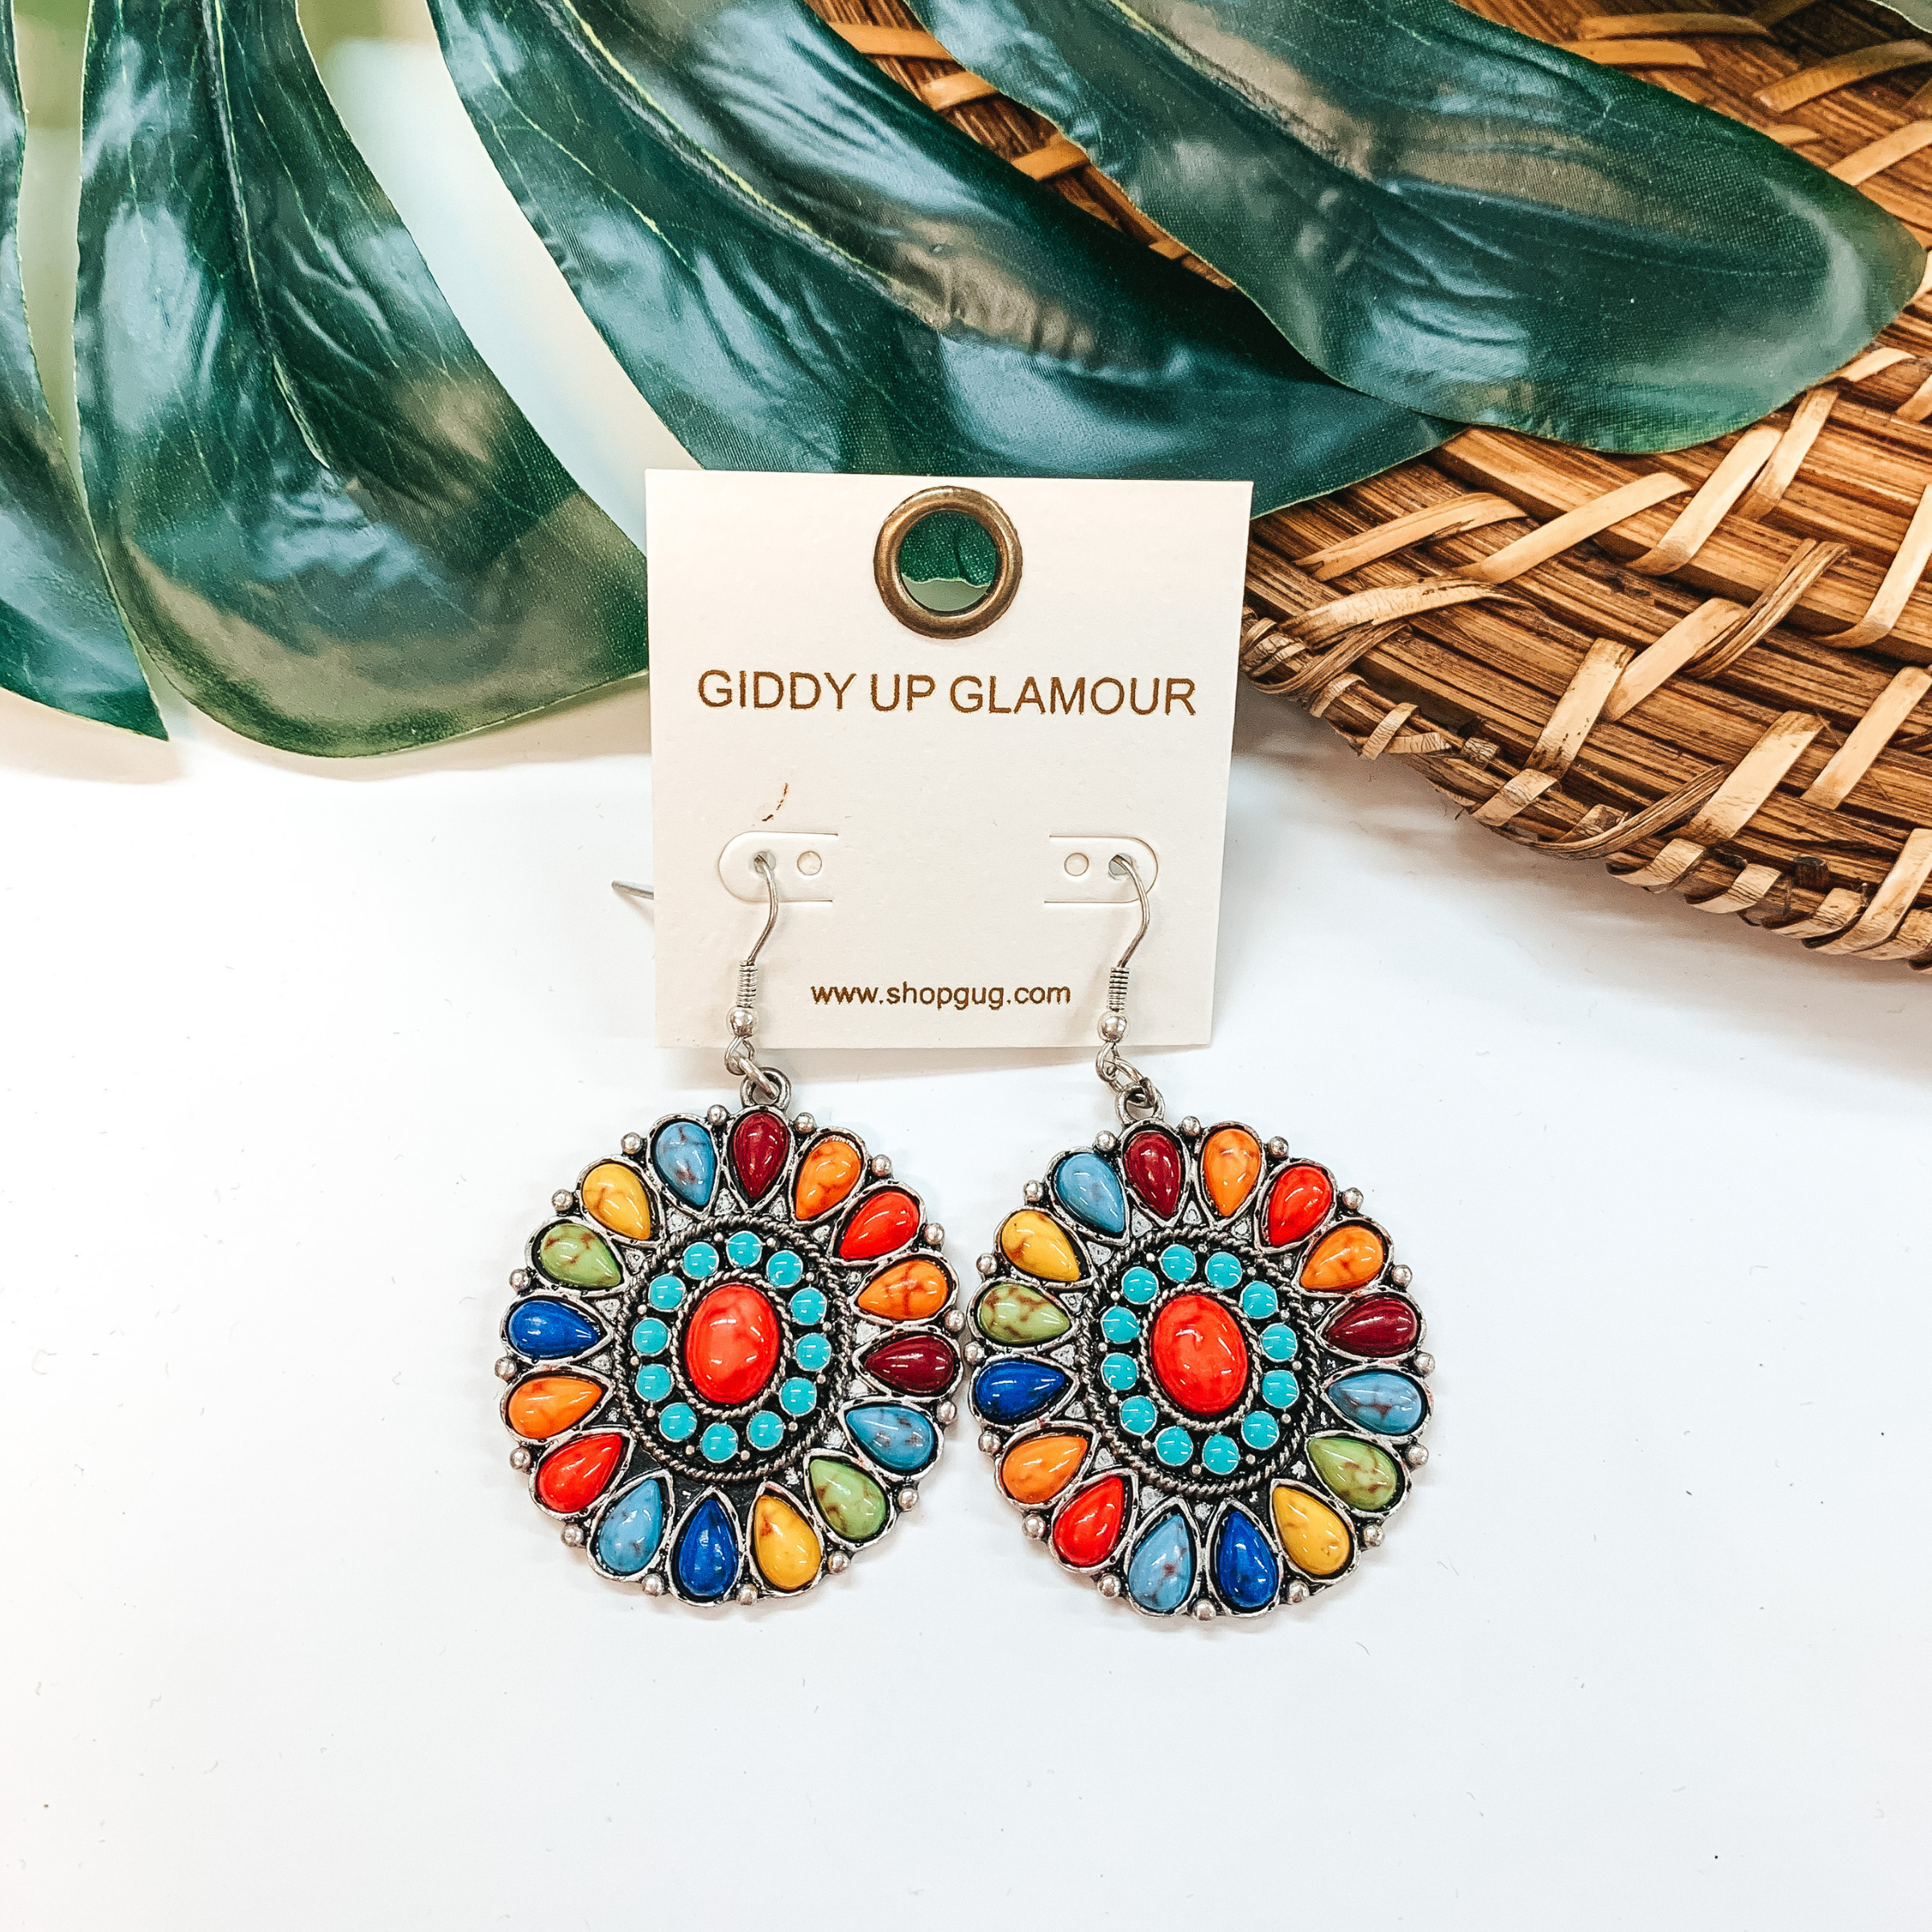 Western Concho Earrings in Multi - Giddy Up Glamour Boutique